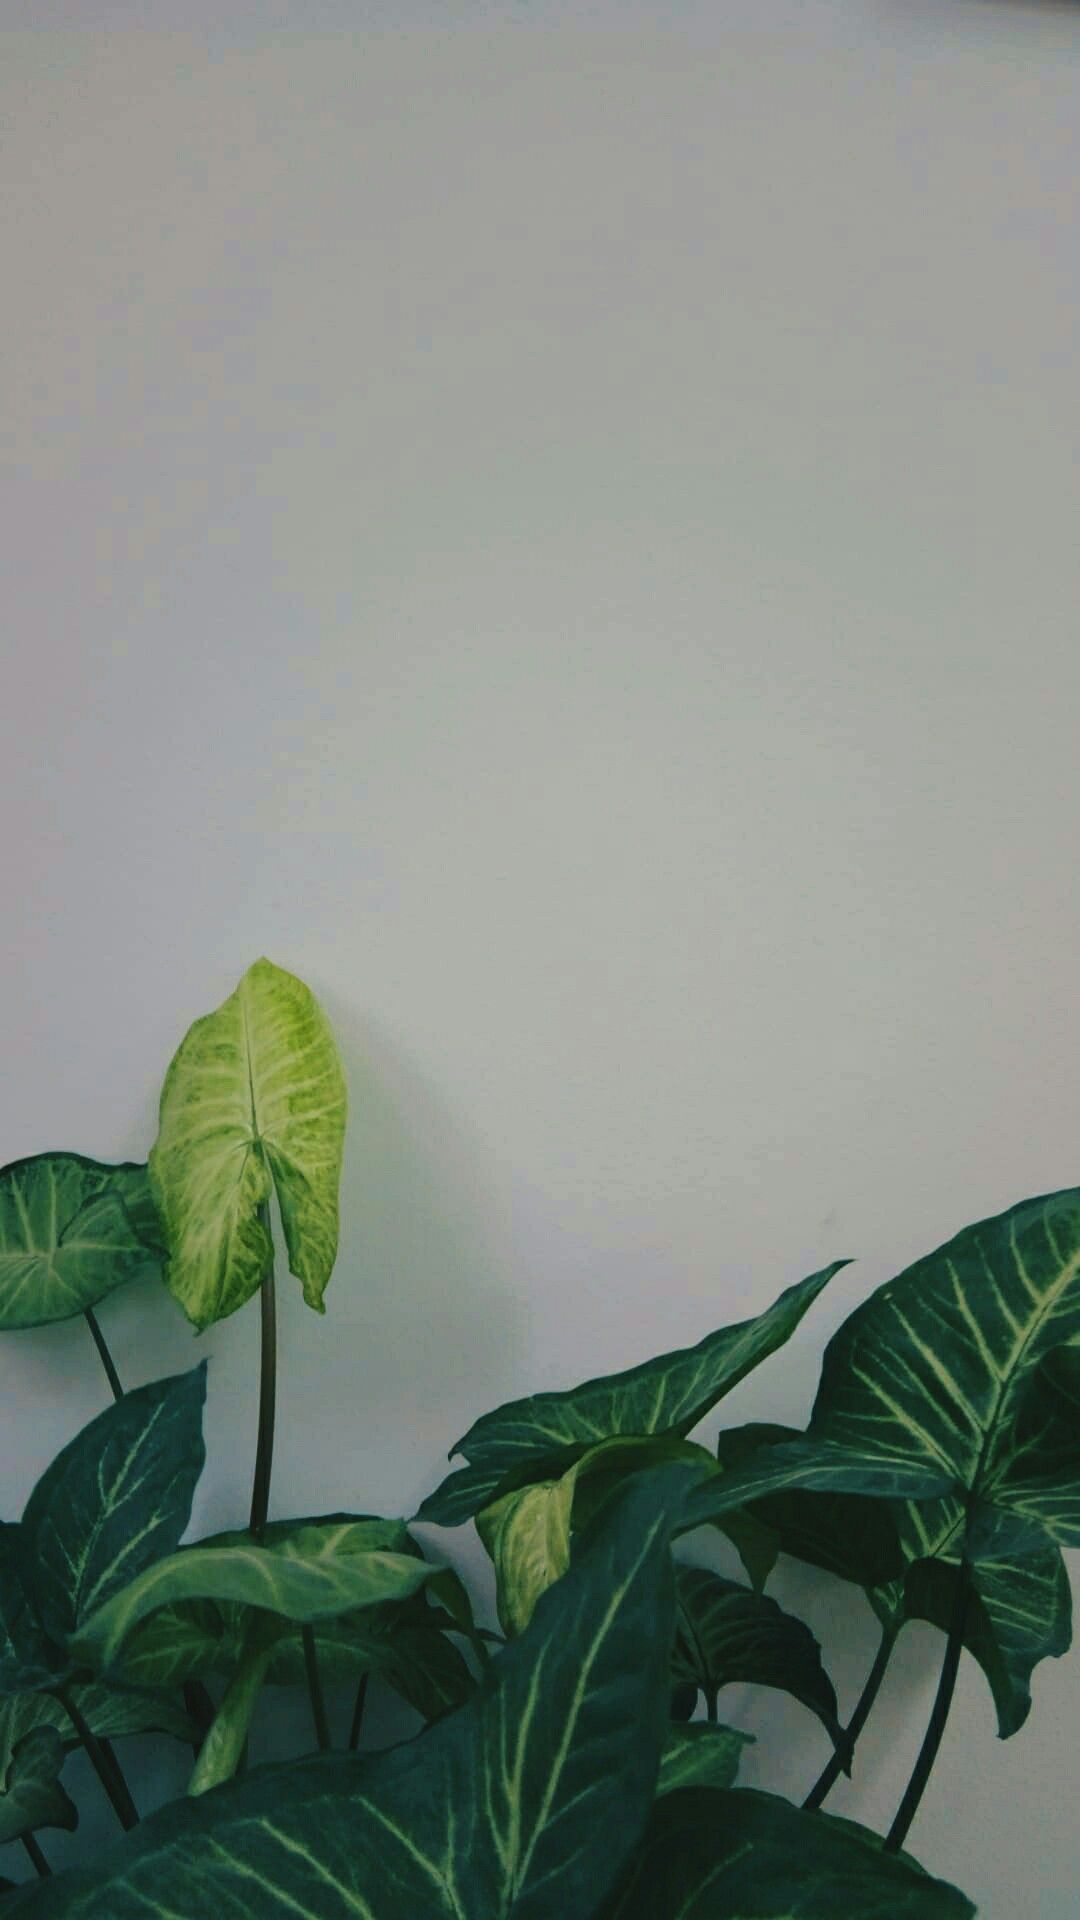 Aesthetic Green White Wallpaper Android. Green aesthetic, White wallpaper, Plant aesthetic